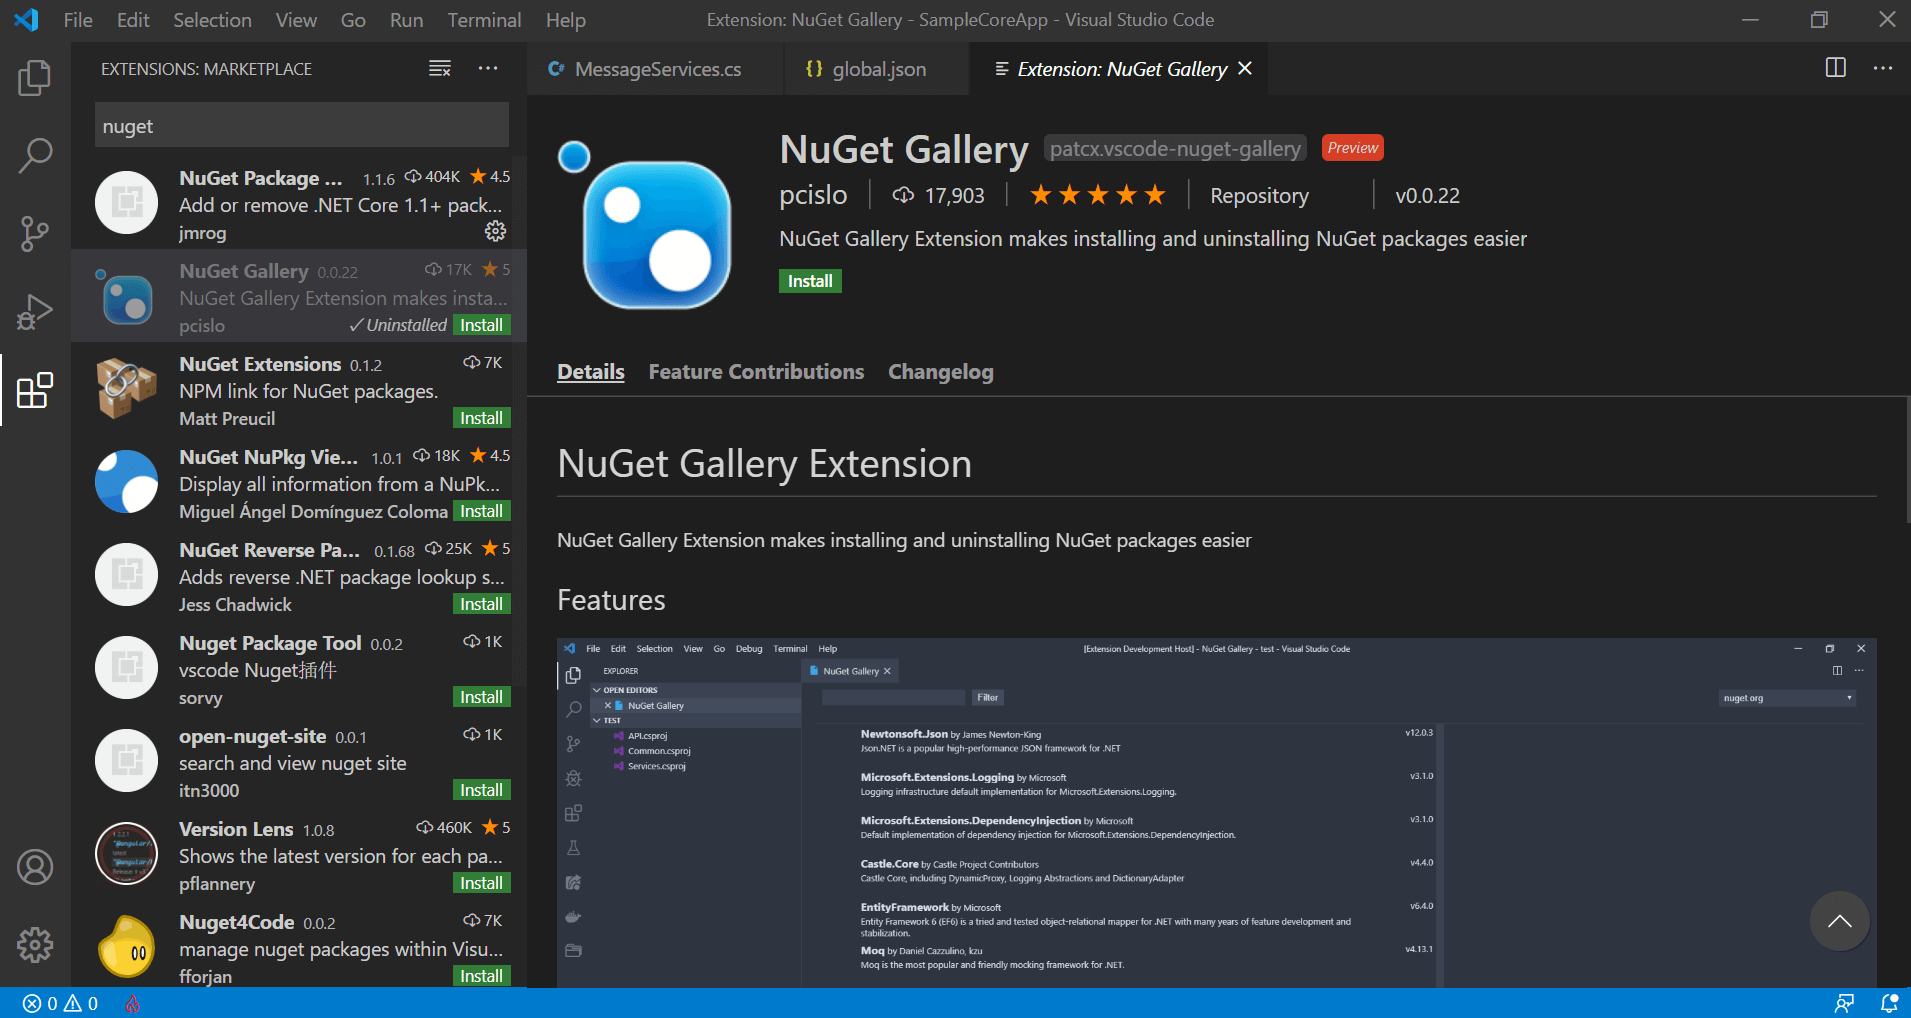 Install the NuGet Gallery Extension